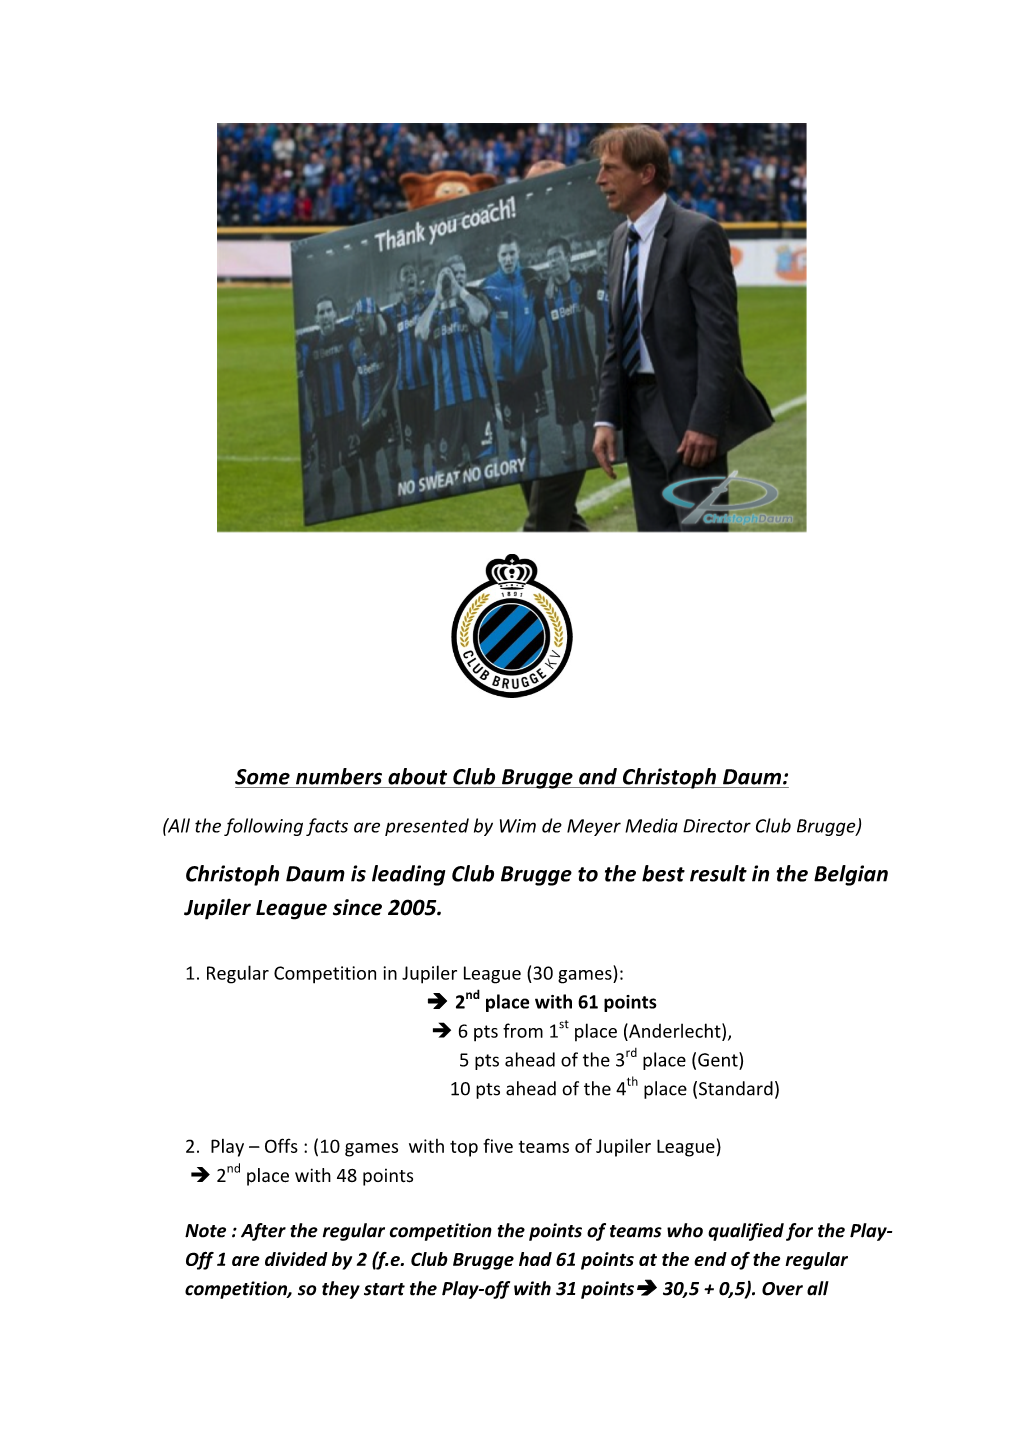 Some Numbers About Club Brugge and Christoph Daum: Christoph